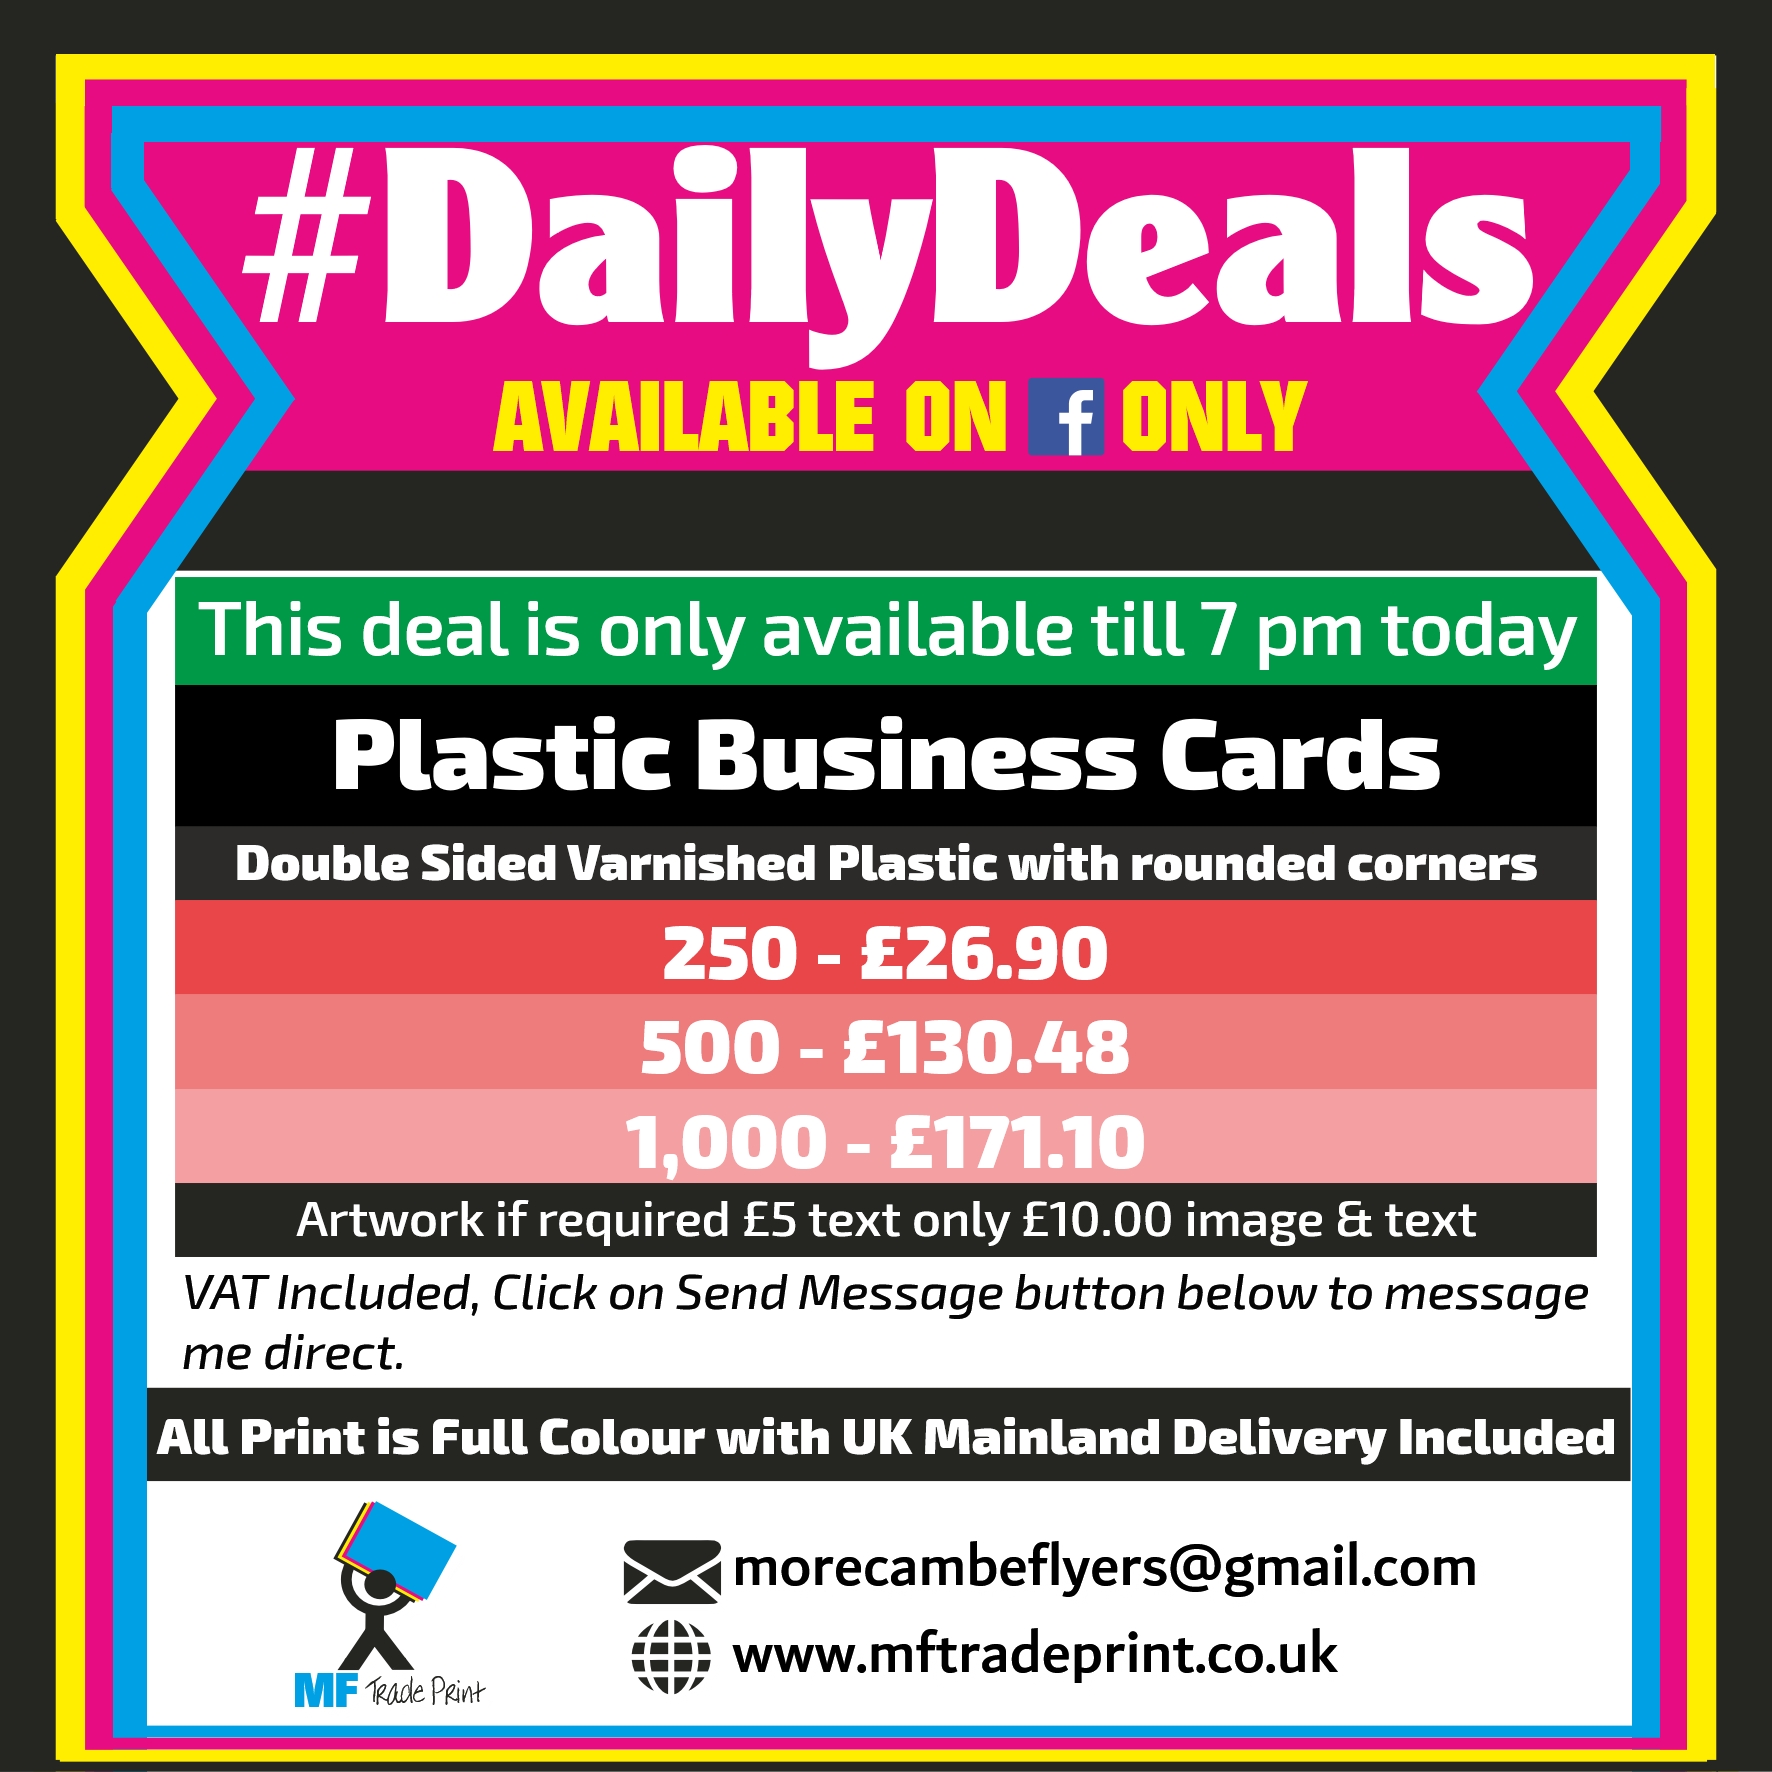 #dailydeals plastic business card varnished bargain price